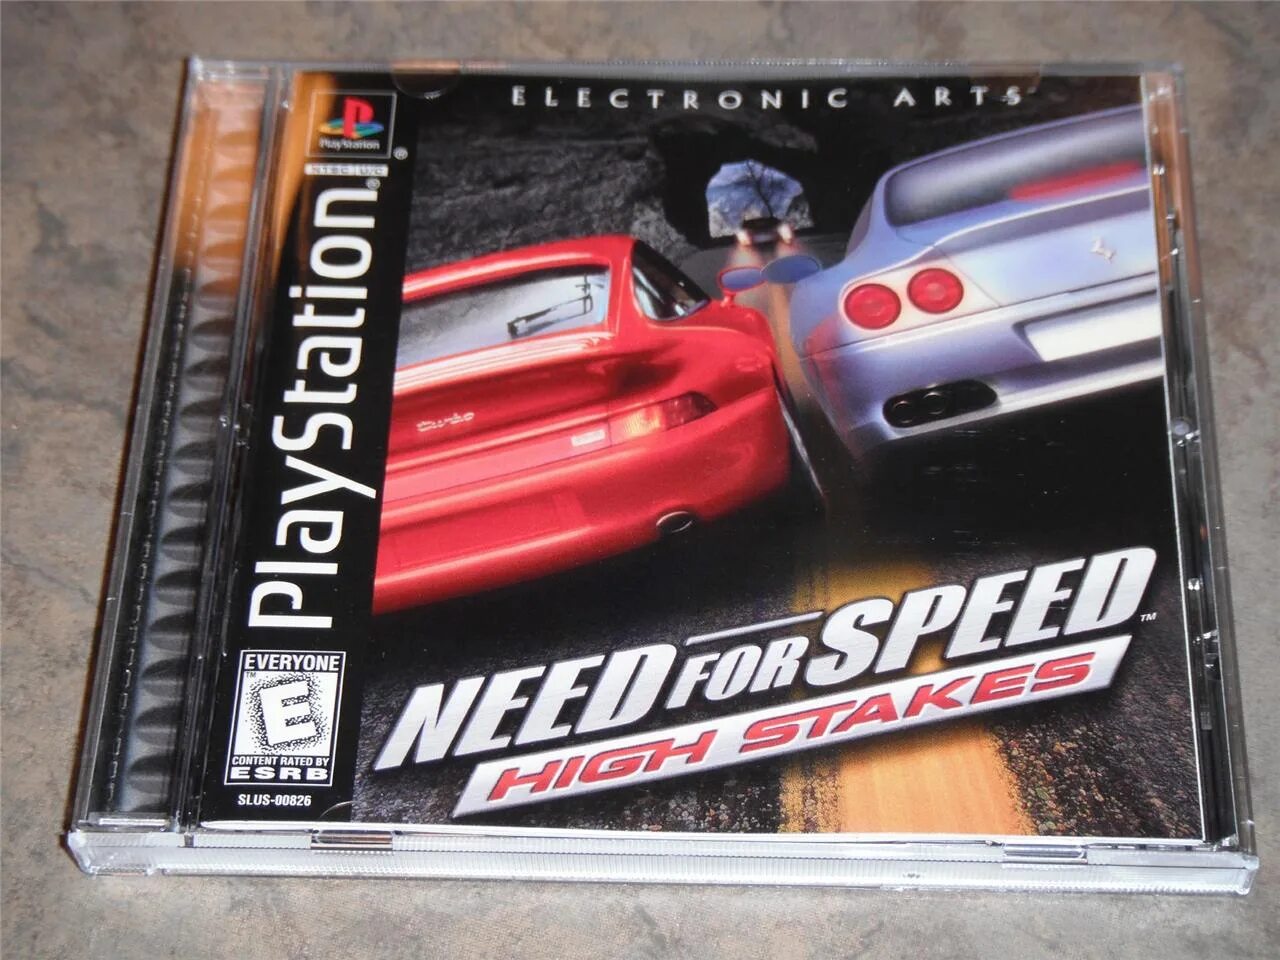 High stakes 4. PLAYSTATION 1 диск need for Speed High stakes. Need for Speed High stakes ps1. NFS 4 High stakes ps1. NFS High stakes ps1 обложка.